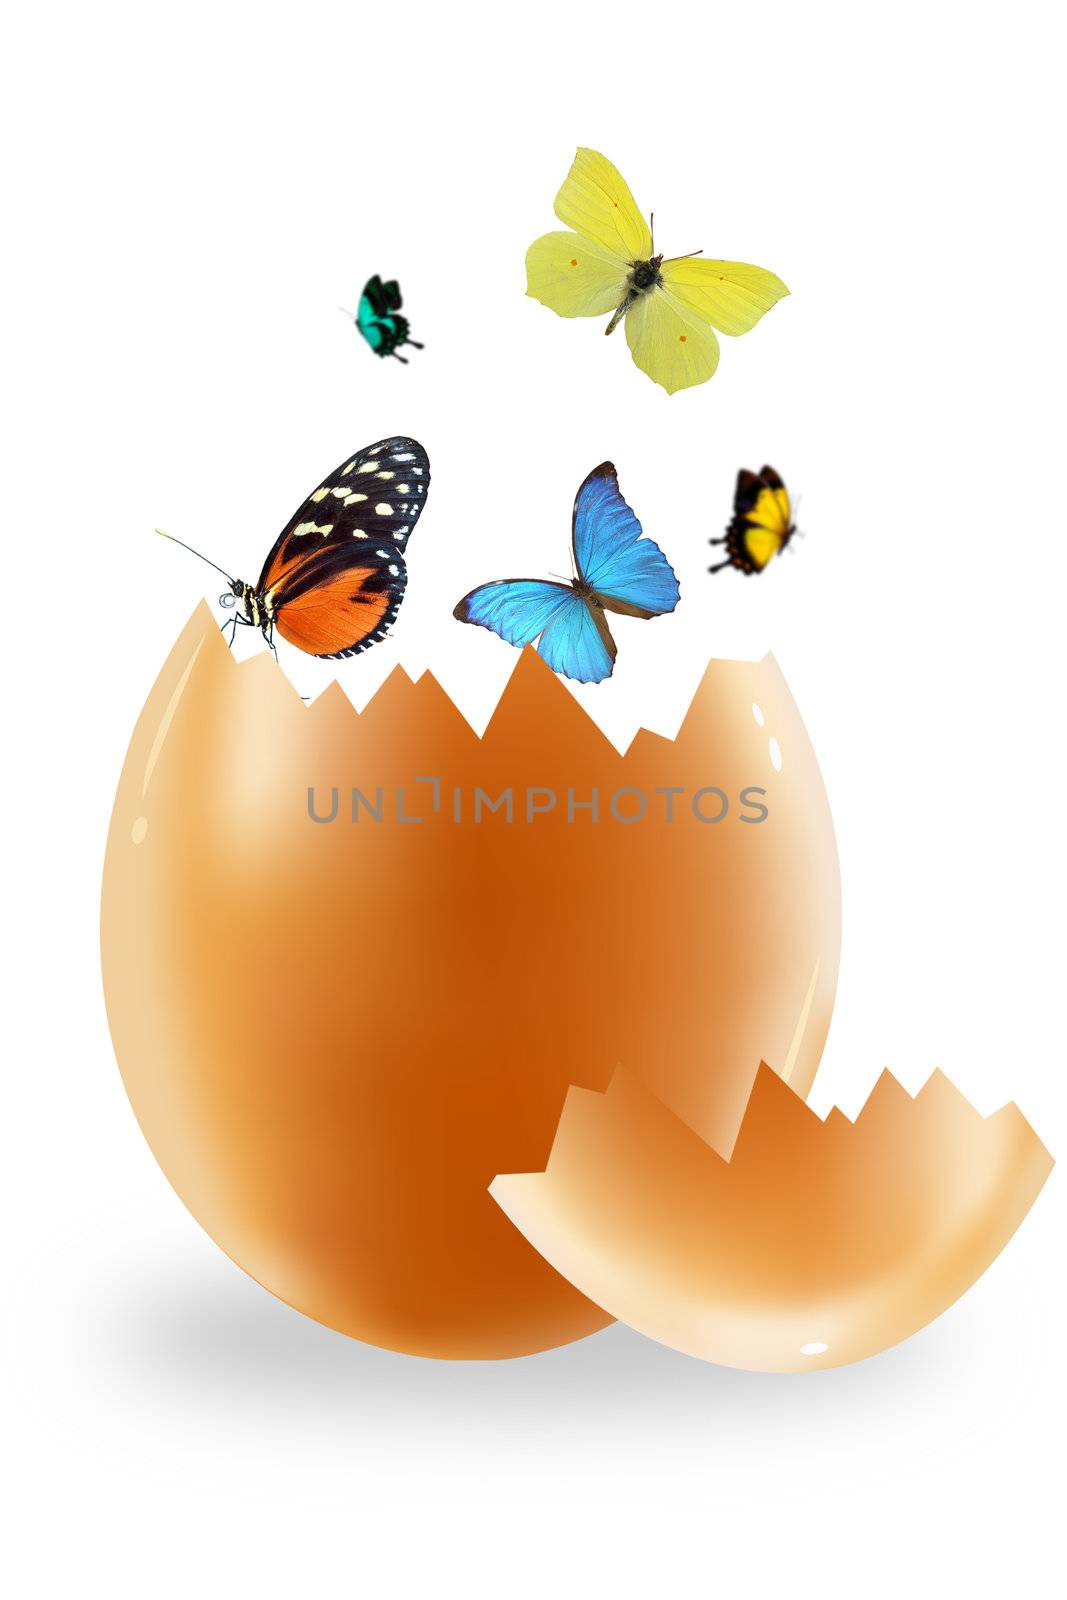 Egg and butterfly on a white background. Abstract